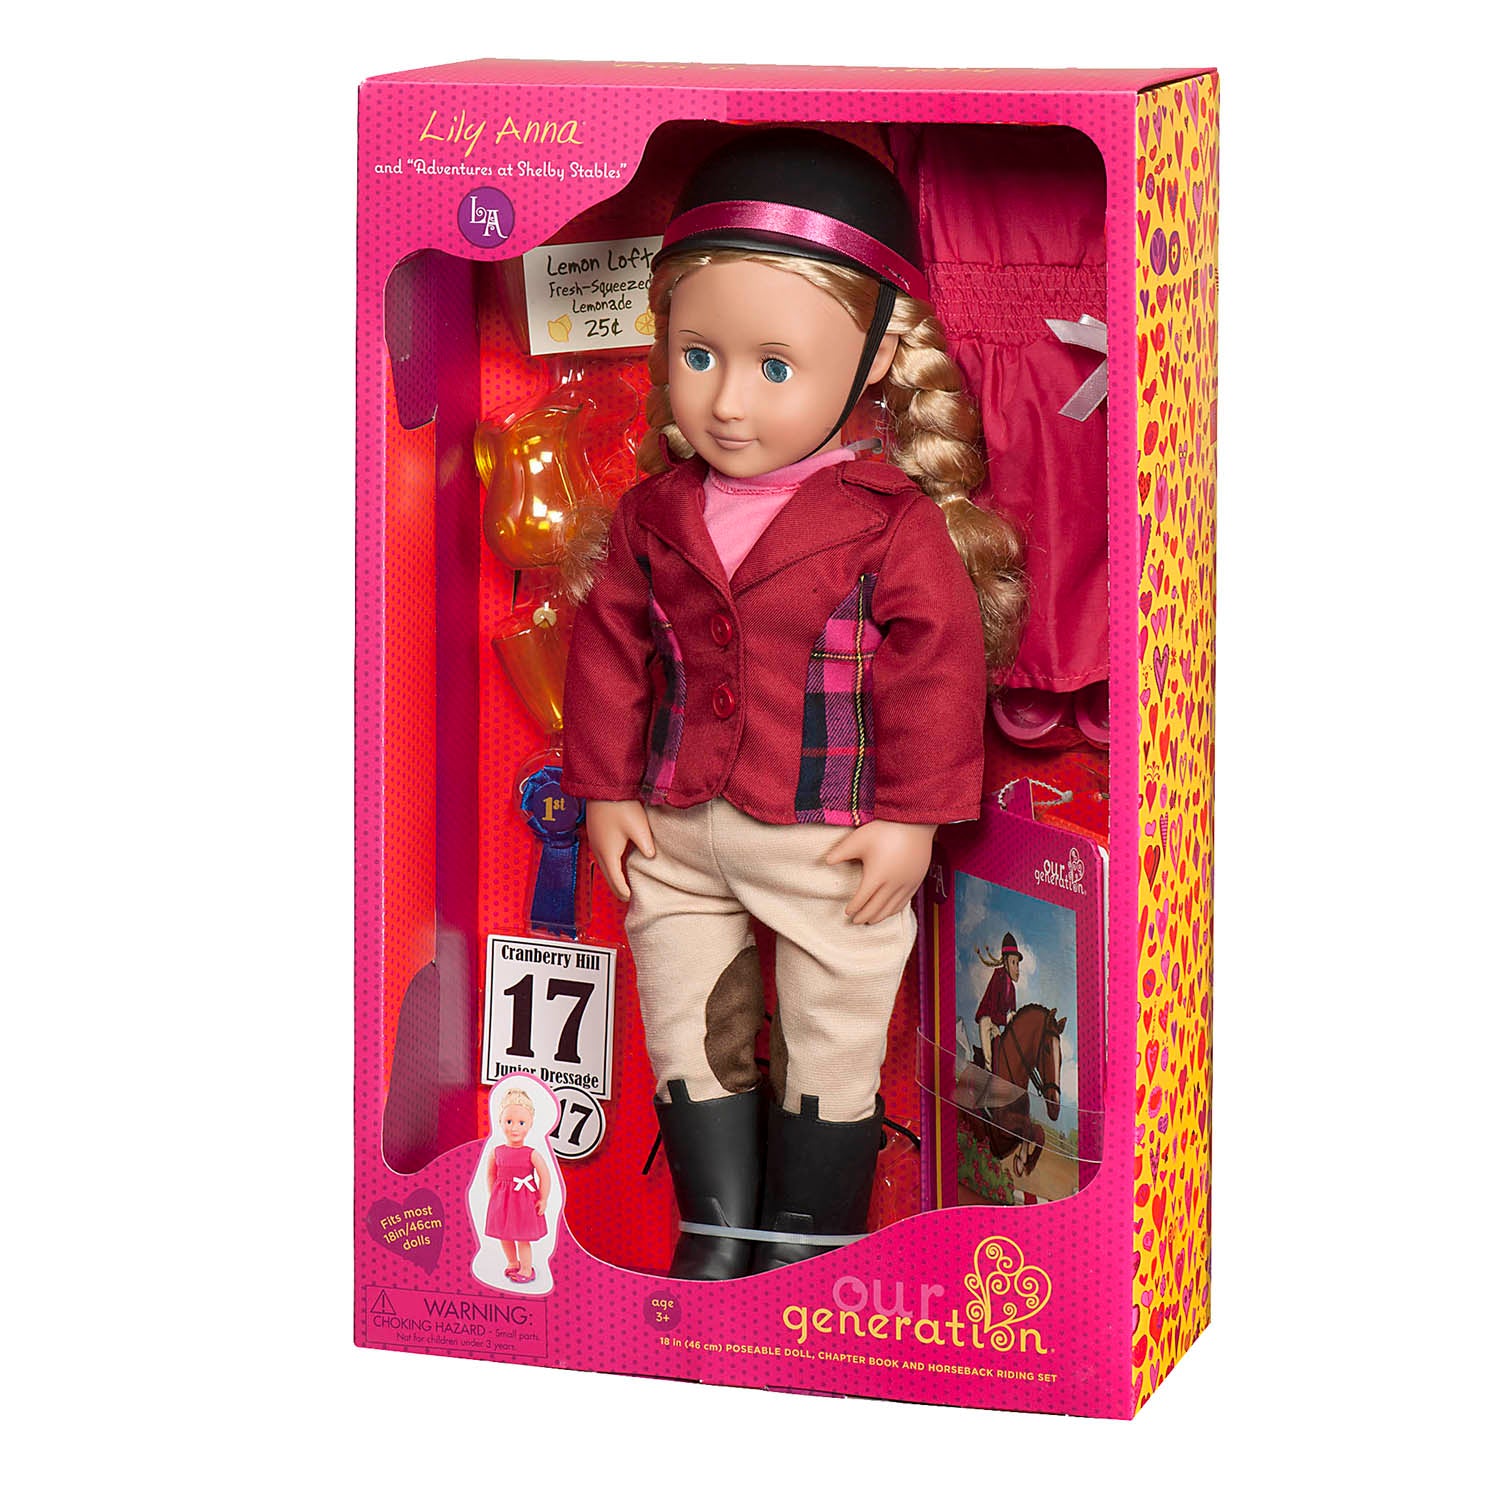 Our Generation 18" Deluxe Poseable Doll w Book - Lily Anna is an amazing doll accessory for creative play for young girls The Toy Wagon